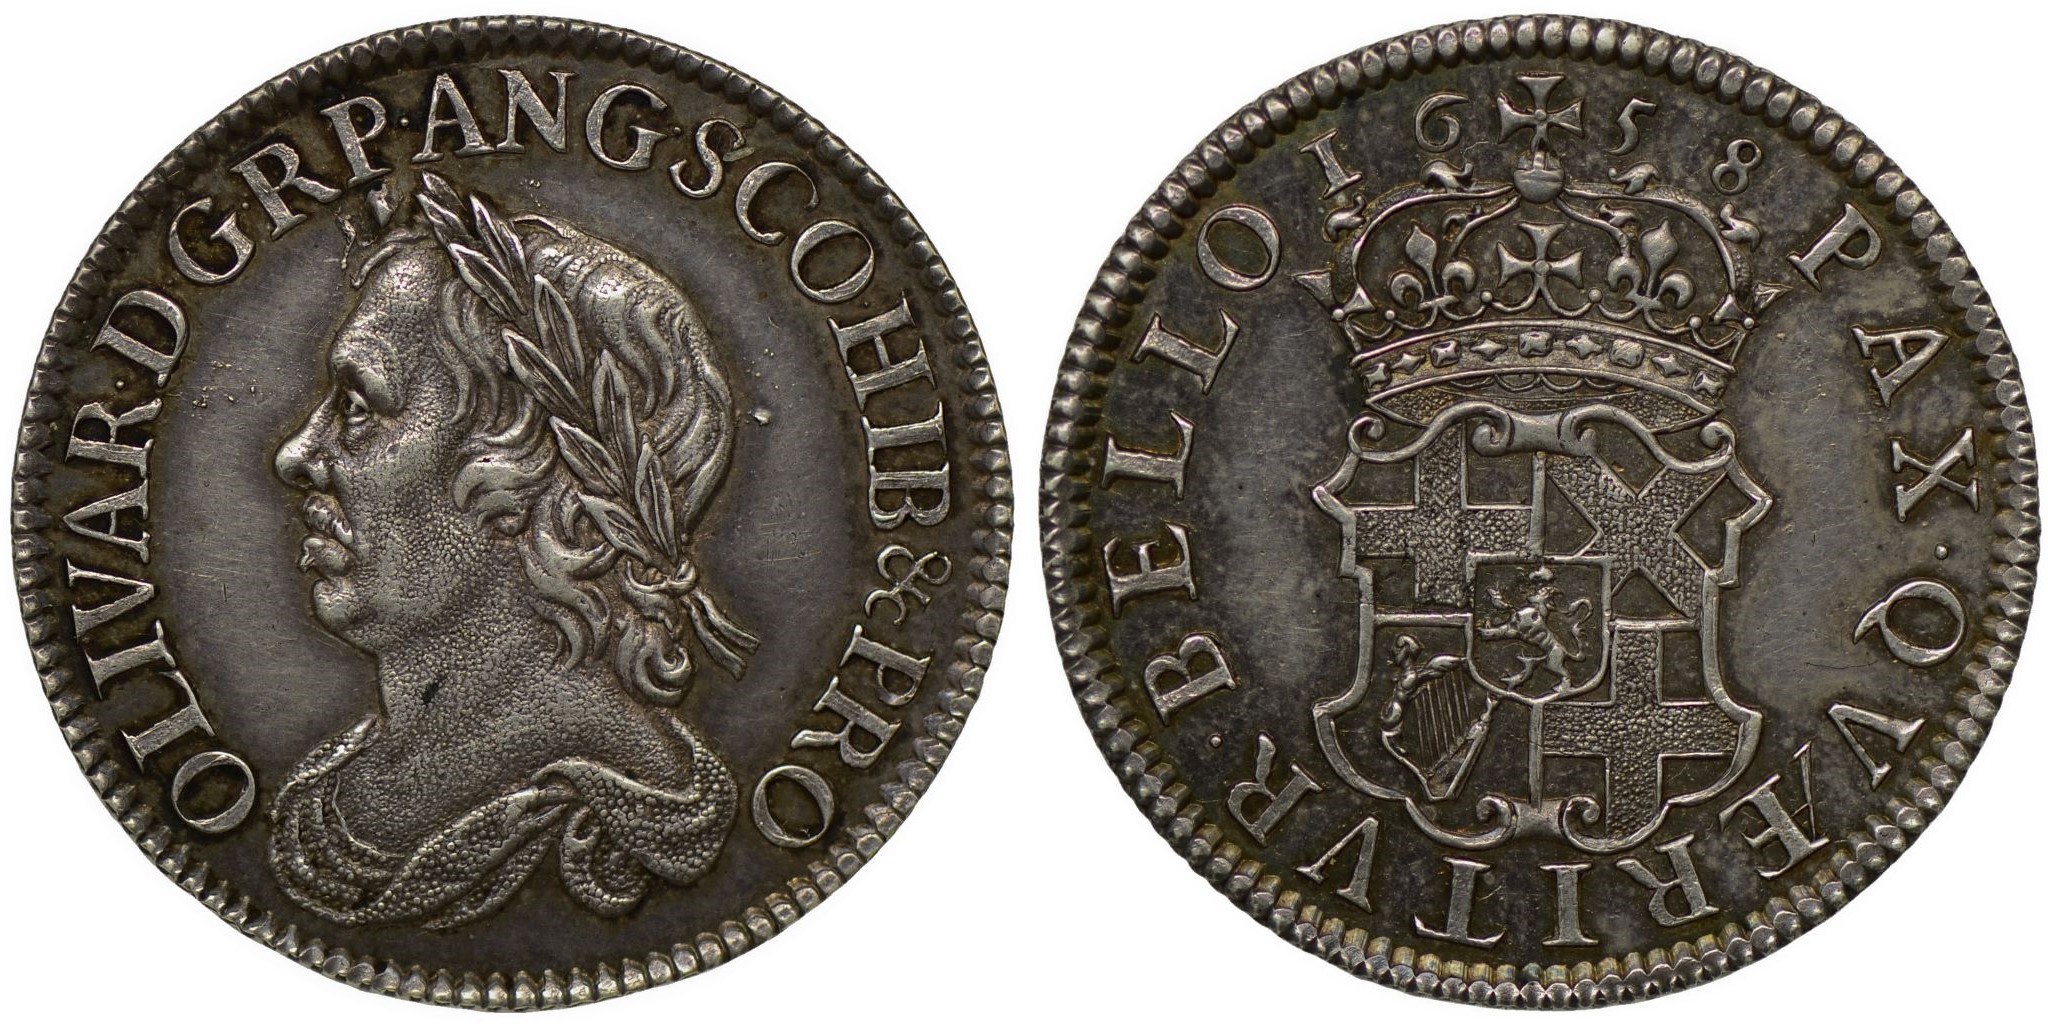 A silver shilling struck in 1658 bearing the portrait of Oliver Cromwell